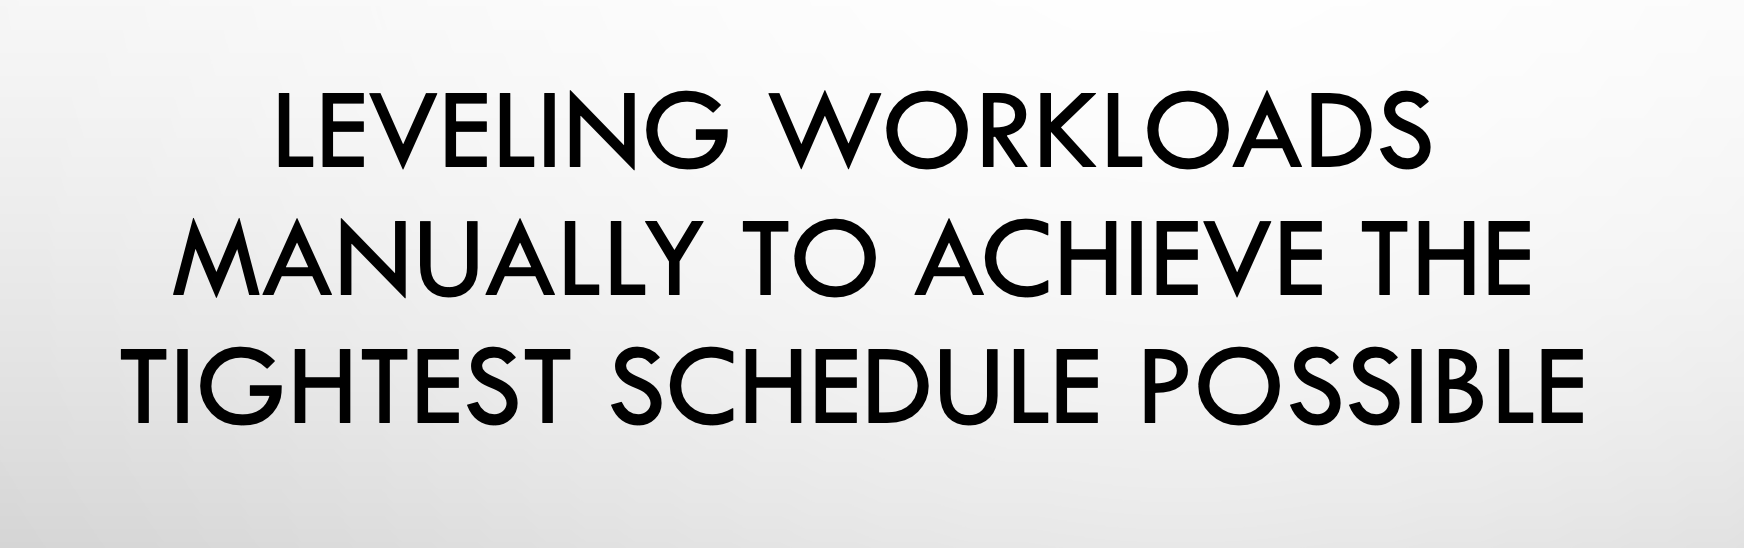 Leveling Workloads Manually to Achieve the Tightest Schedule Possible